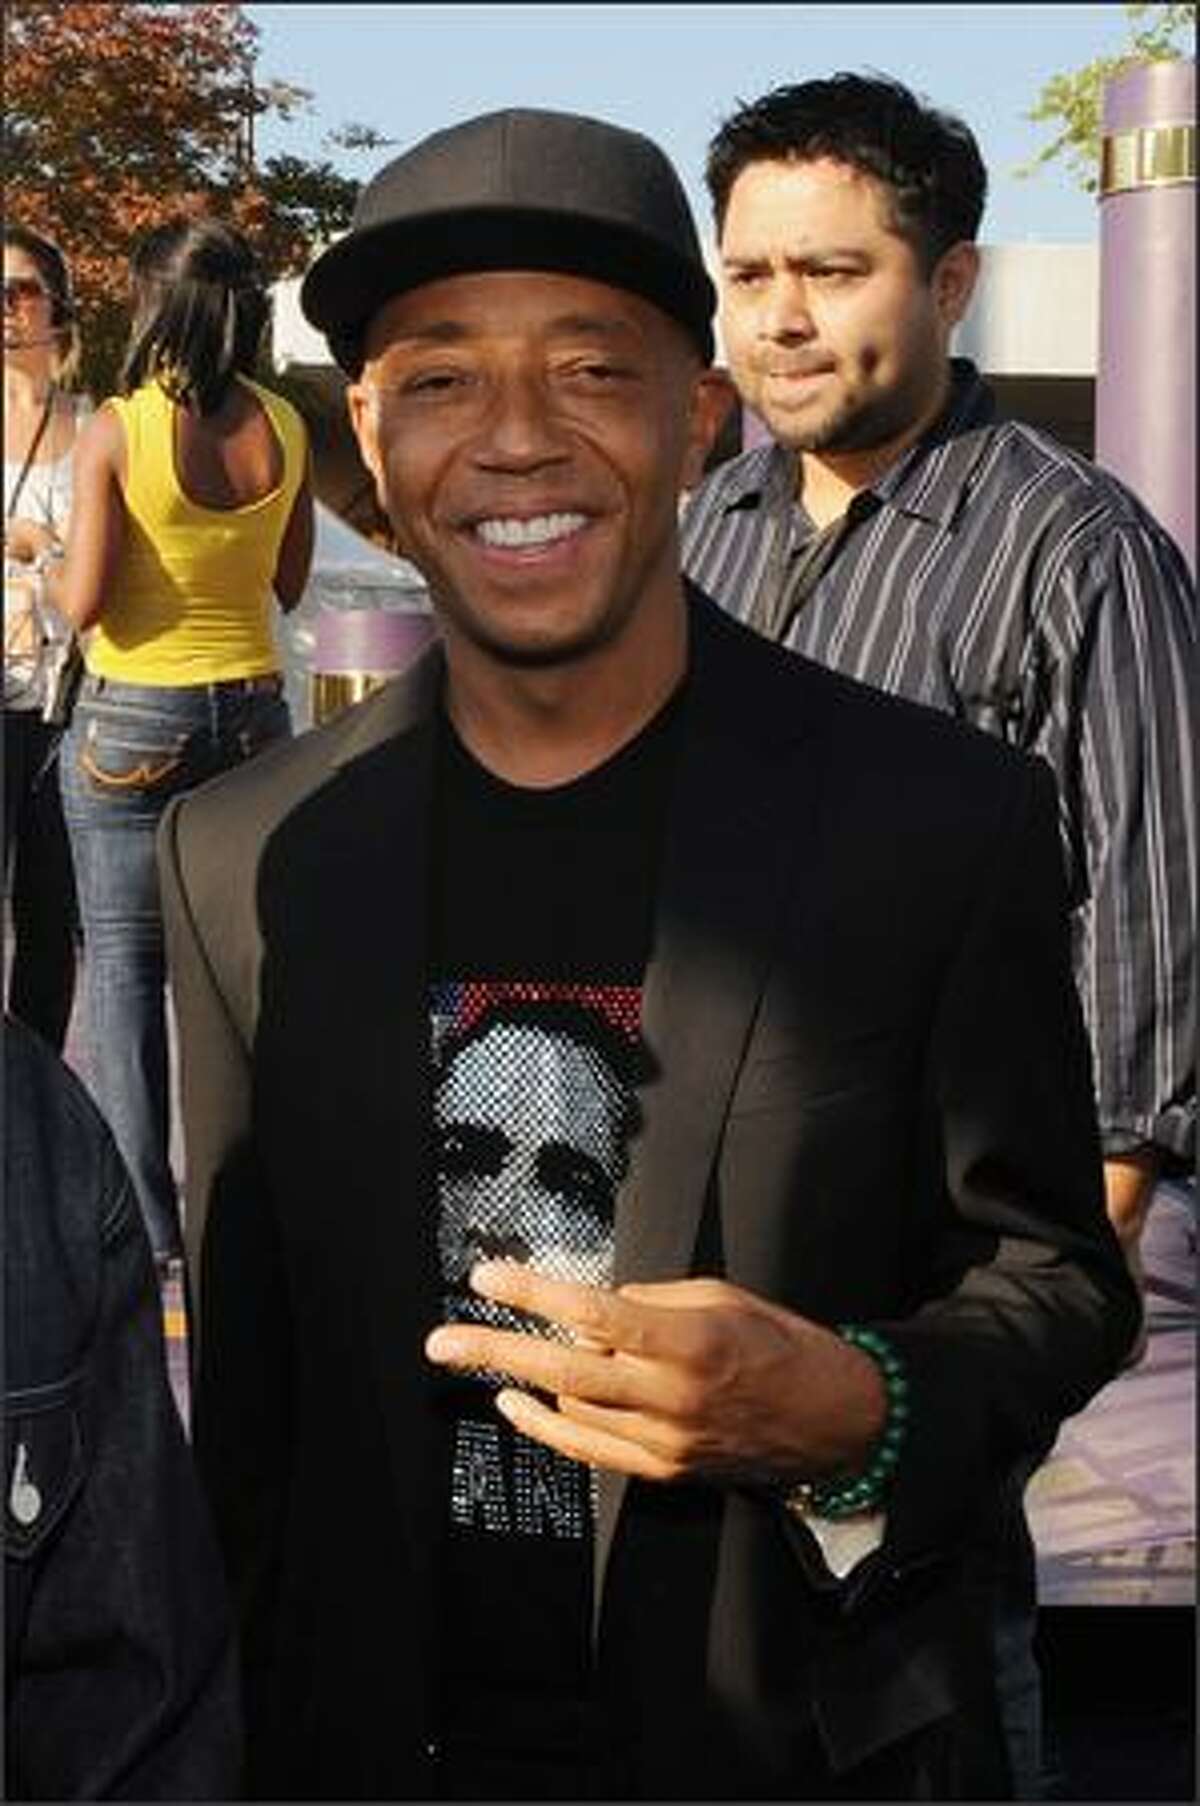 Russell Simmons attends the 2008 BET Hip-Hop Awards at The Boisfeuillet Jones Atlanta Civic Center on Saturday in Atlanta, Georgia.